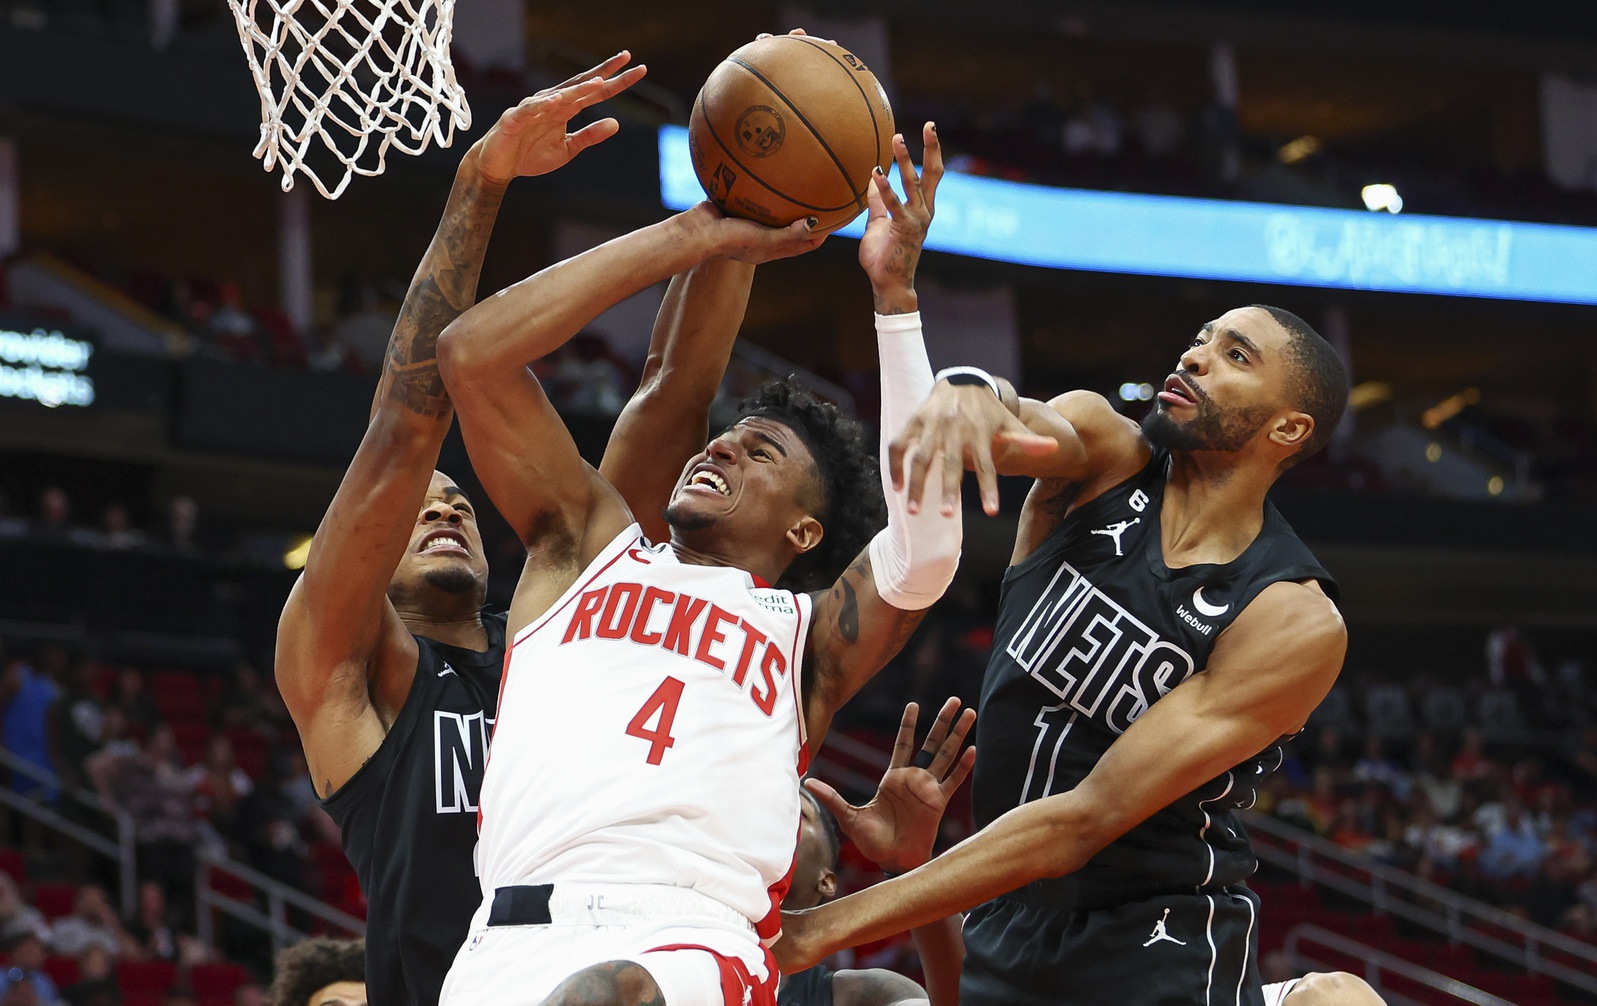 Mar 7, 2023; Houston, Texas, USA; Houston Rockets guard Jalen Green (4) attempts to score as Brooklyn Nets center Nic Claxton (33) and forward Mikal Bridges (1) defend during the first quarter at Toyota Center. Mandatory Credit: Troy Taormina-USA TODAY Sports